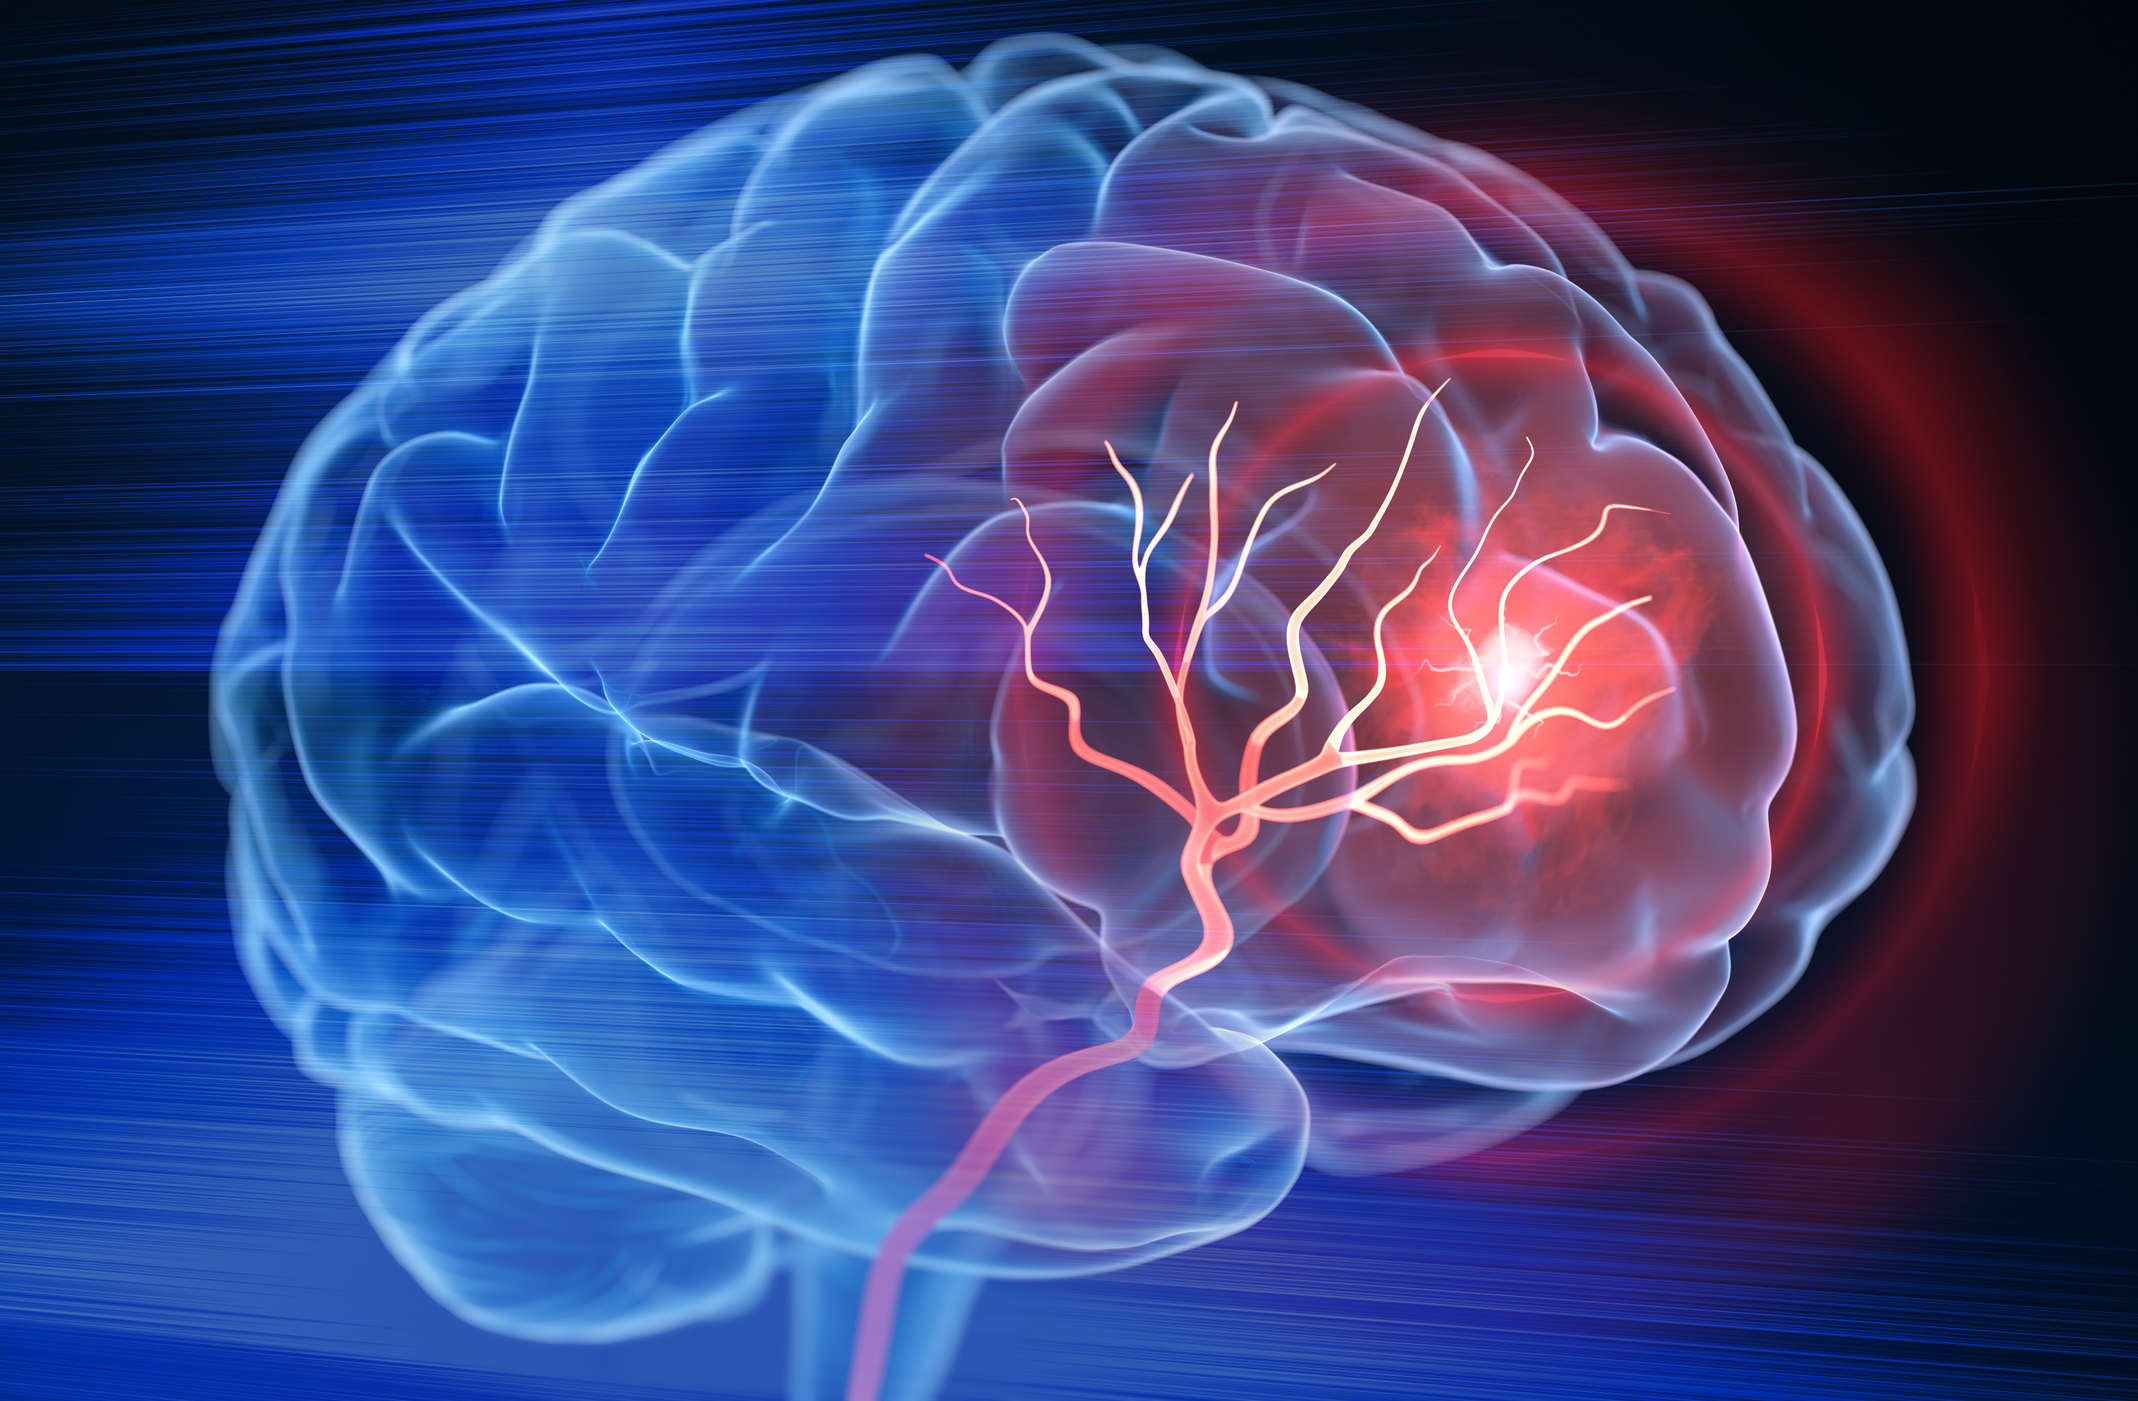 Recognizing stroke and aneurysm symptoms help patients receive lifesaving treatments in time